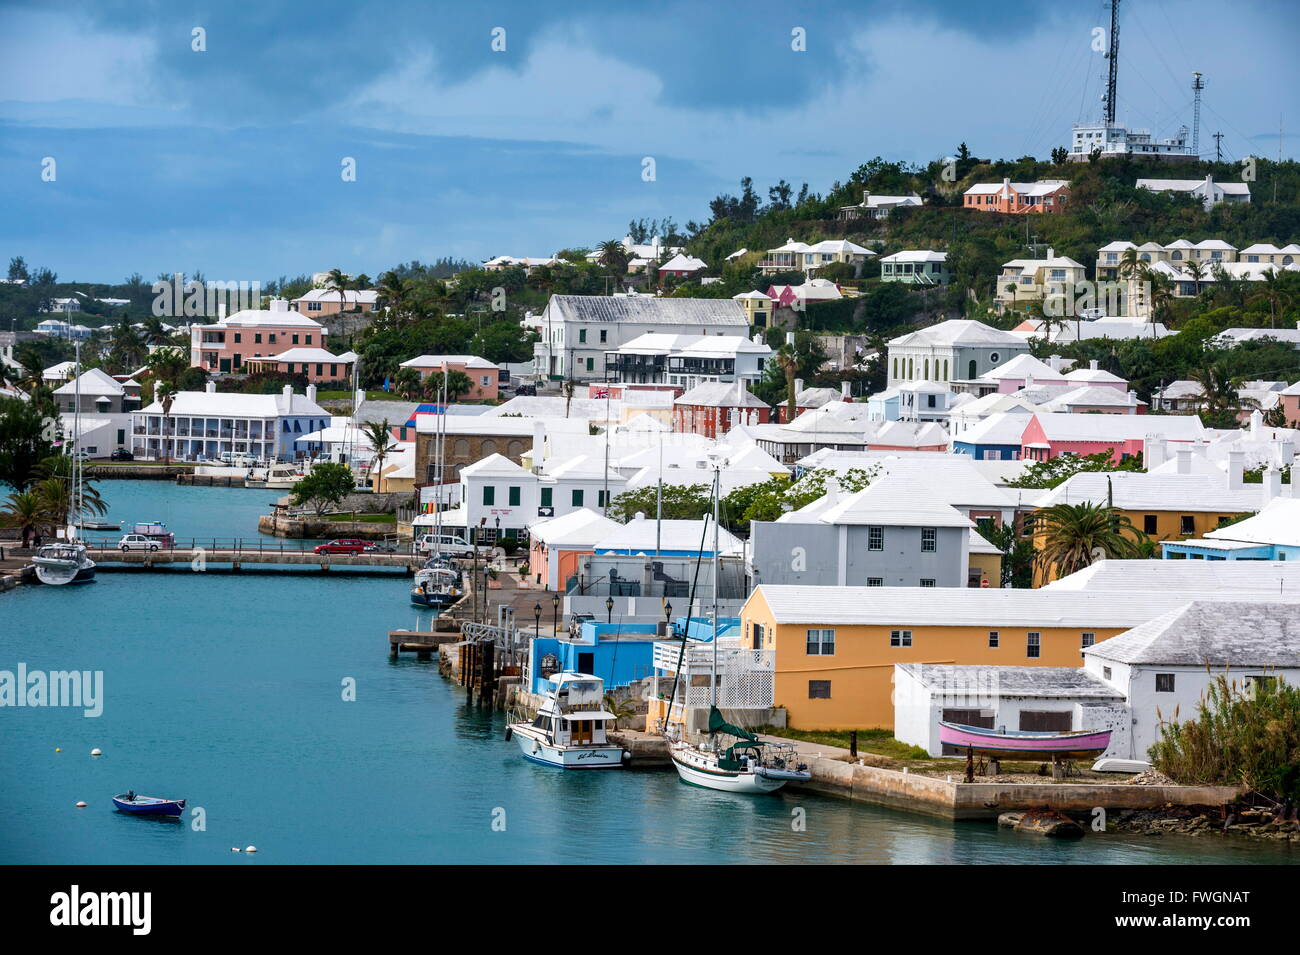 Overlook over the Unesco World Heritage Site, the historic Town of St George, Bermuda, North America Stock Photo